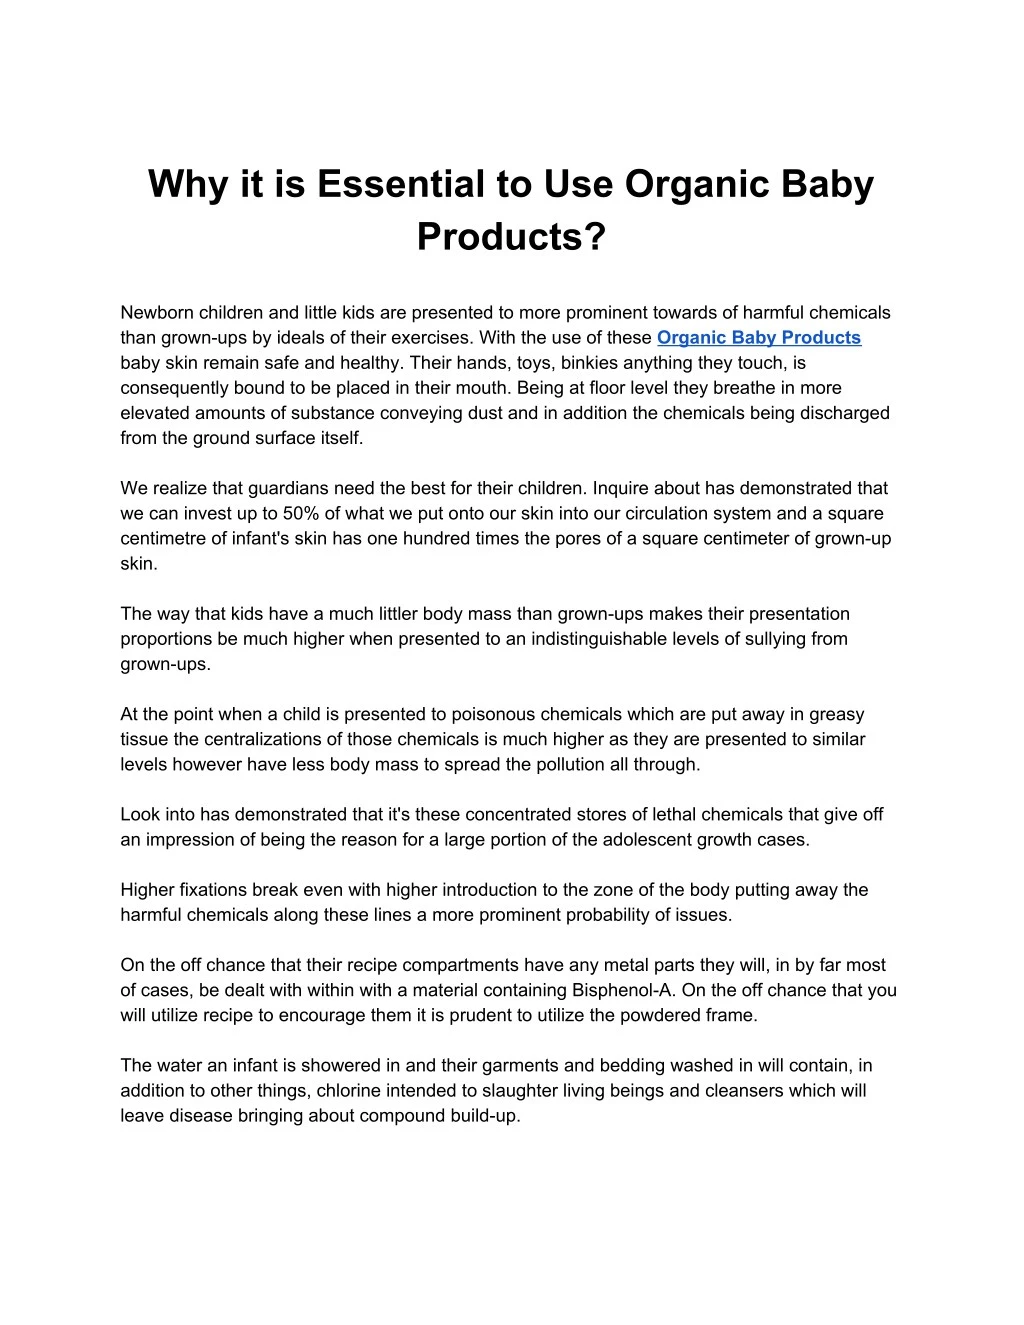 why it is essential to use organic baby products